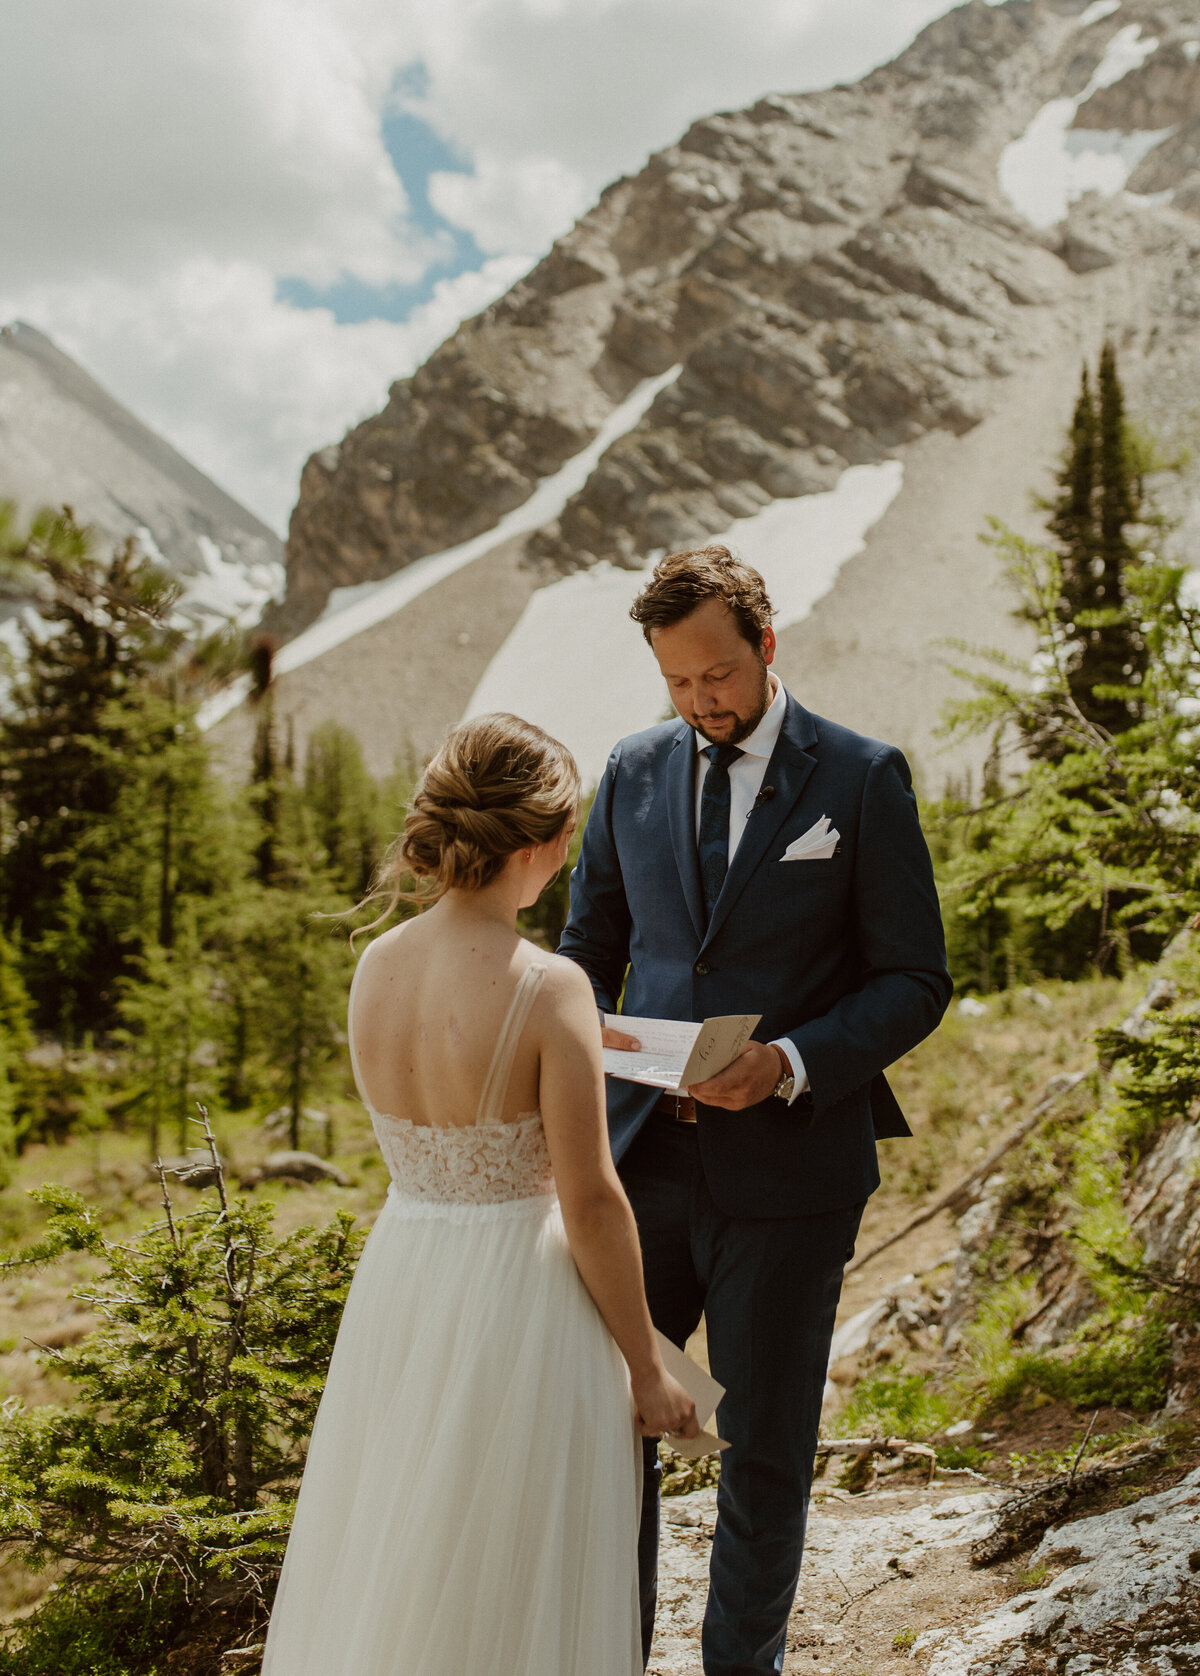 private vows on a mountaintop in Banff, Alberta